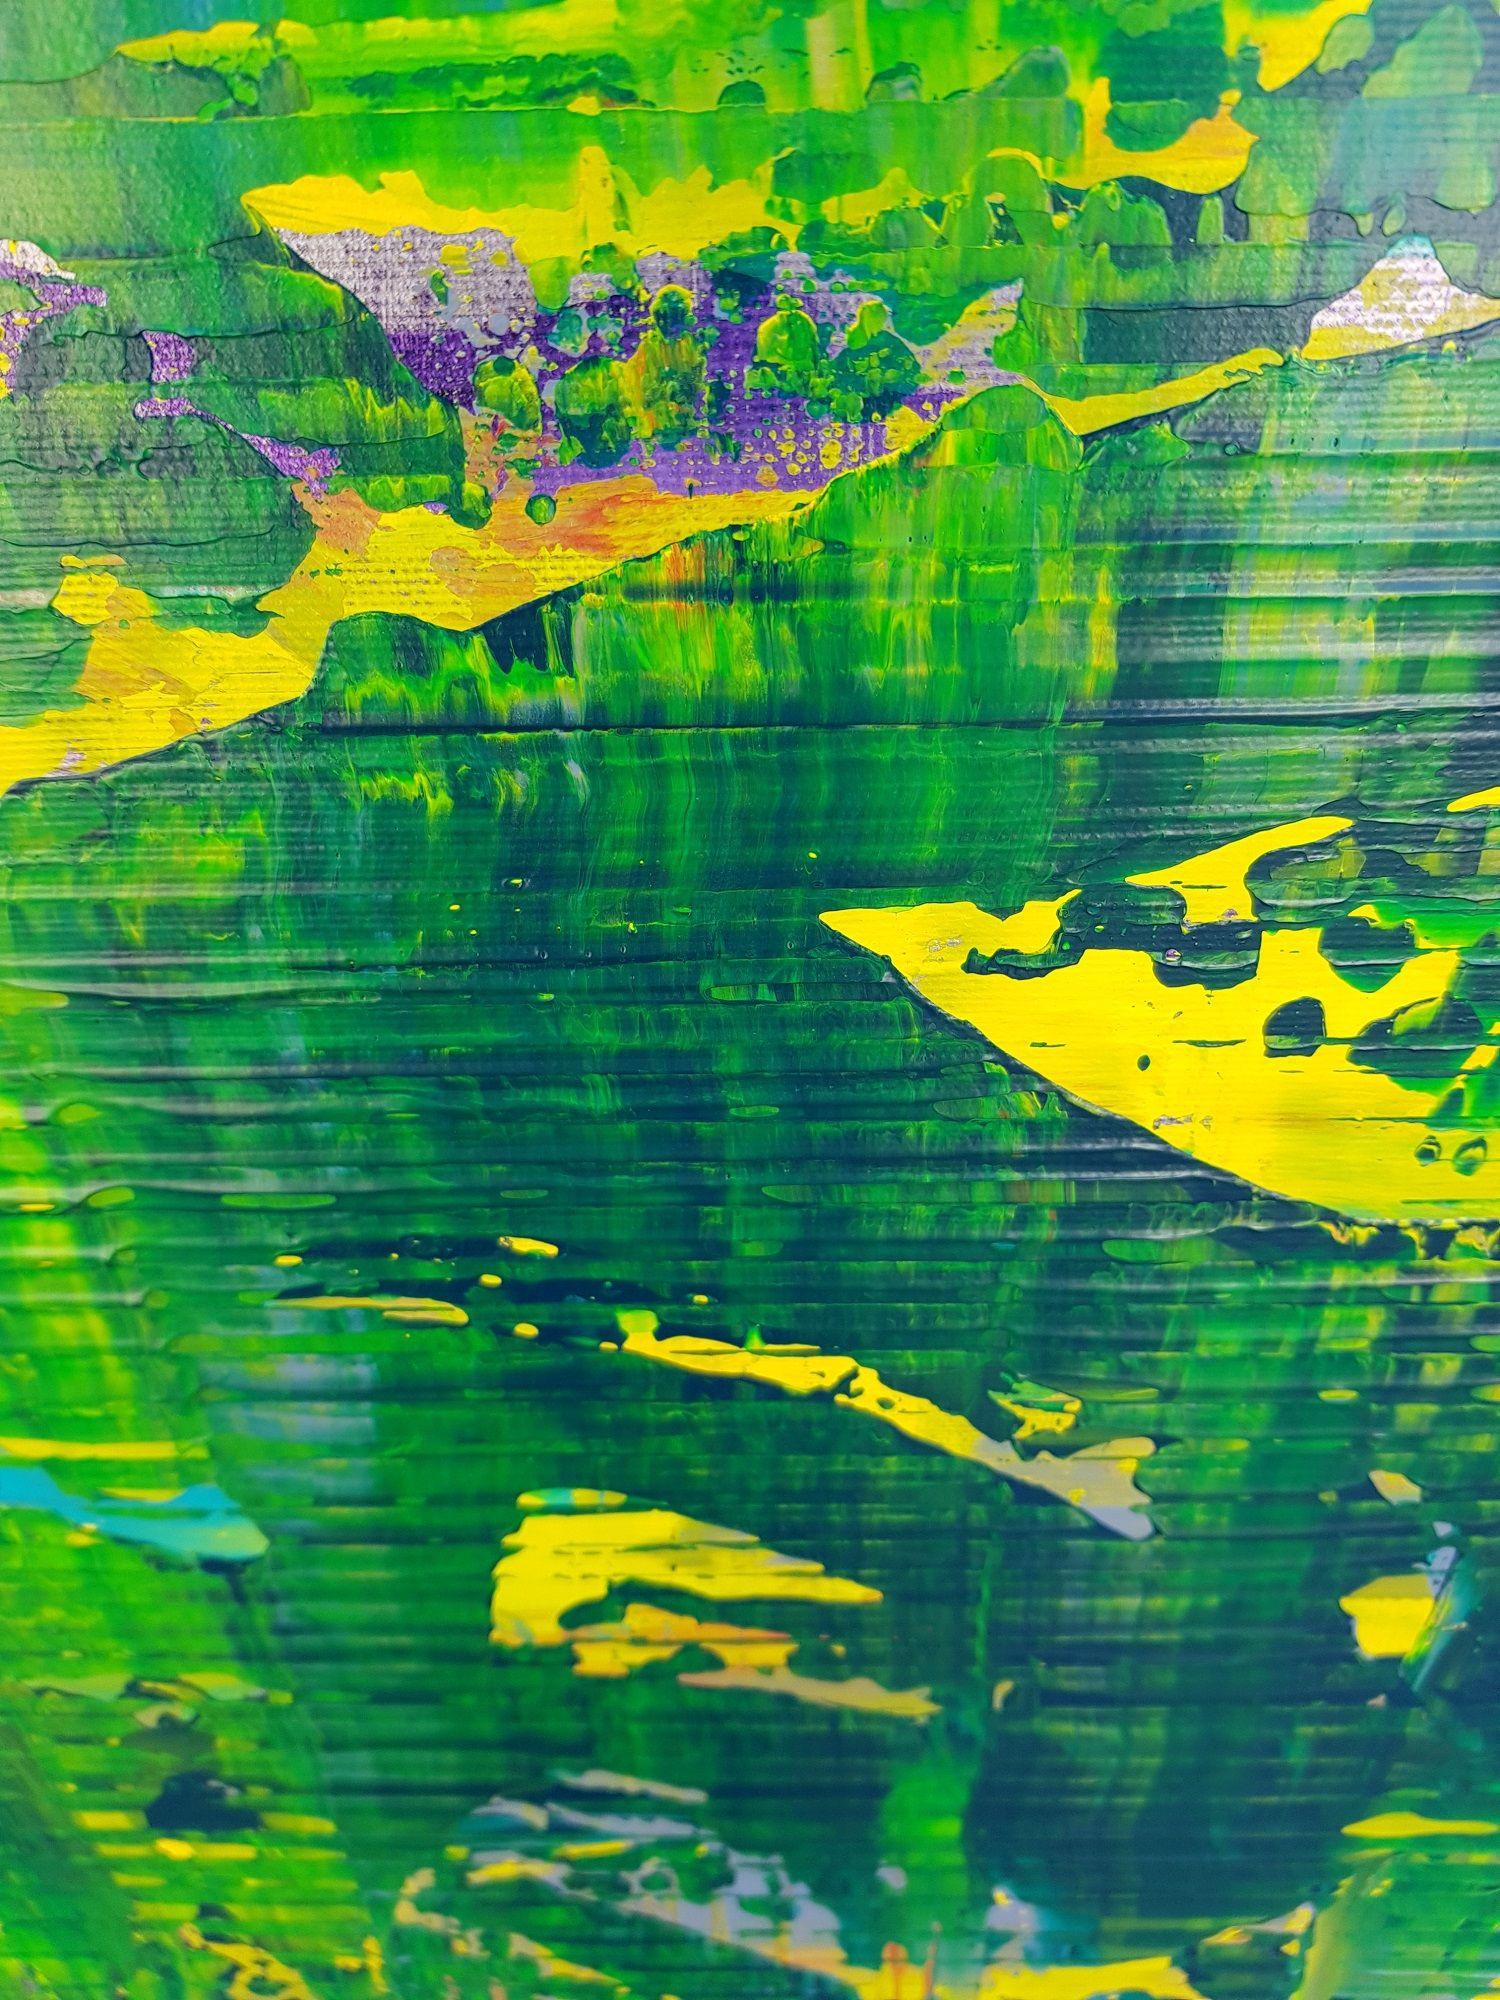 An original one-of-a-kind textured abstract painting with a gentle texture    Shades of green, blue, and yellow.    Artist's signature techniques create a broken surface which allows background colors comes to the surface.  You can literally feel